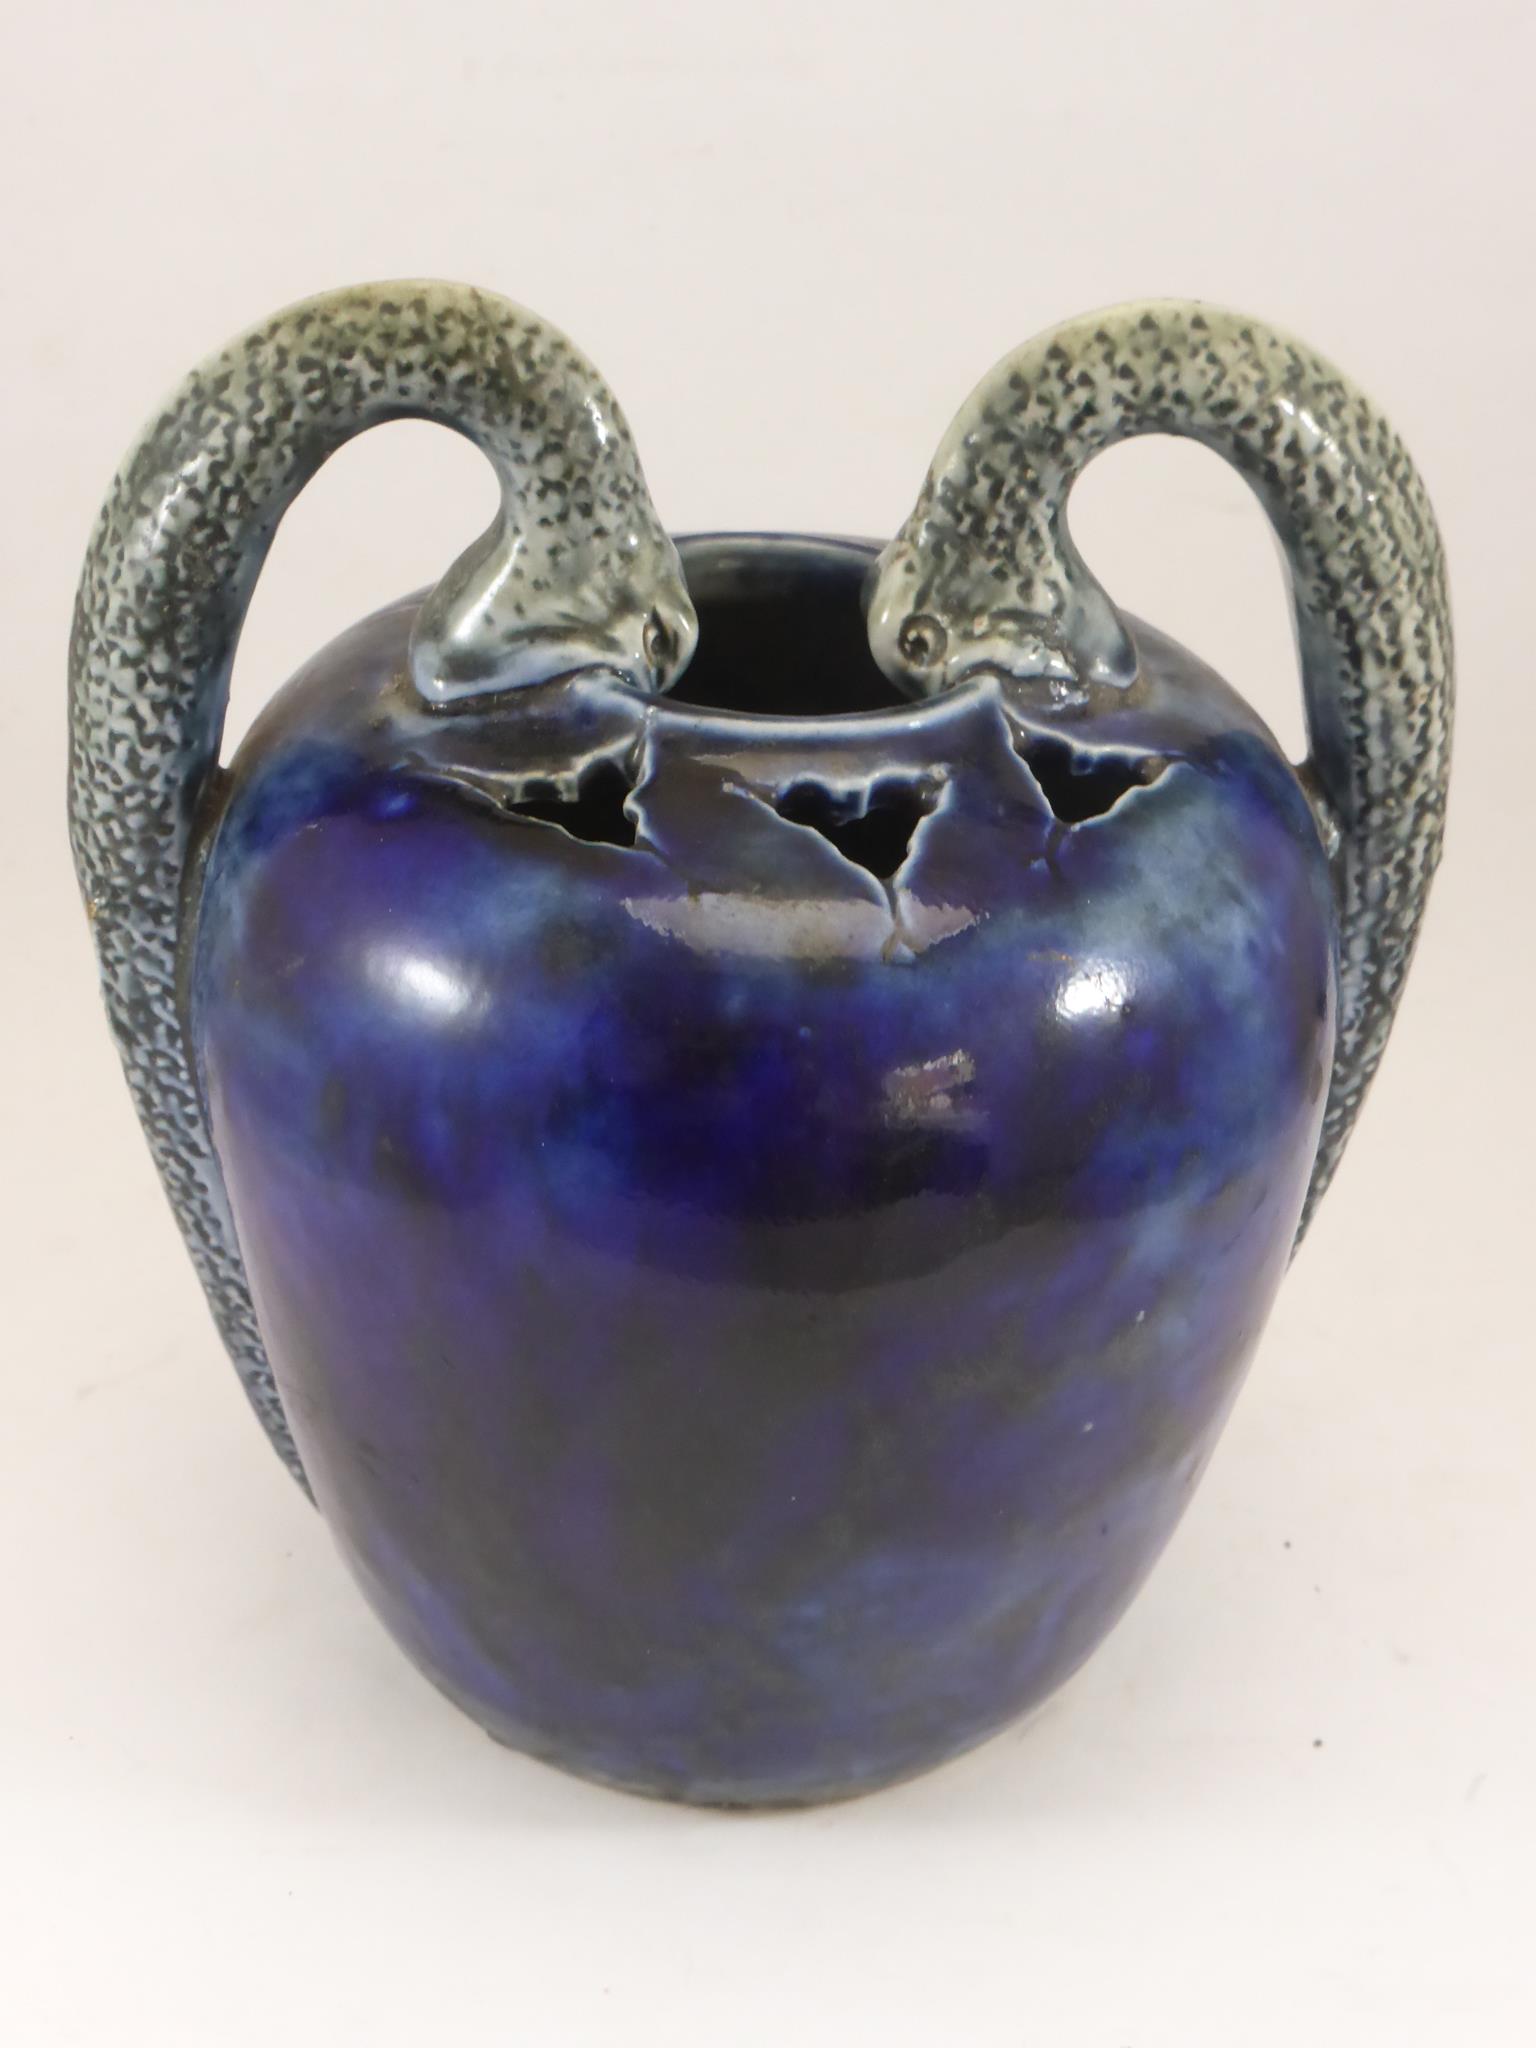 MARTIN BROTHERS STONEWARE (MARTINWARE), VERY UNUSUAL BLUE GLAZED 2 HANDLED VASE, THE HANDLES IN - Image 2 of 4